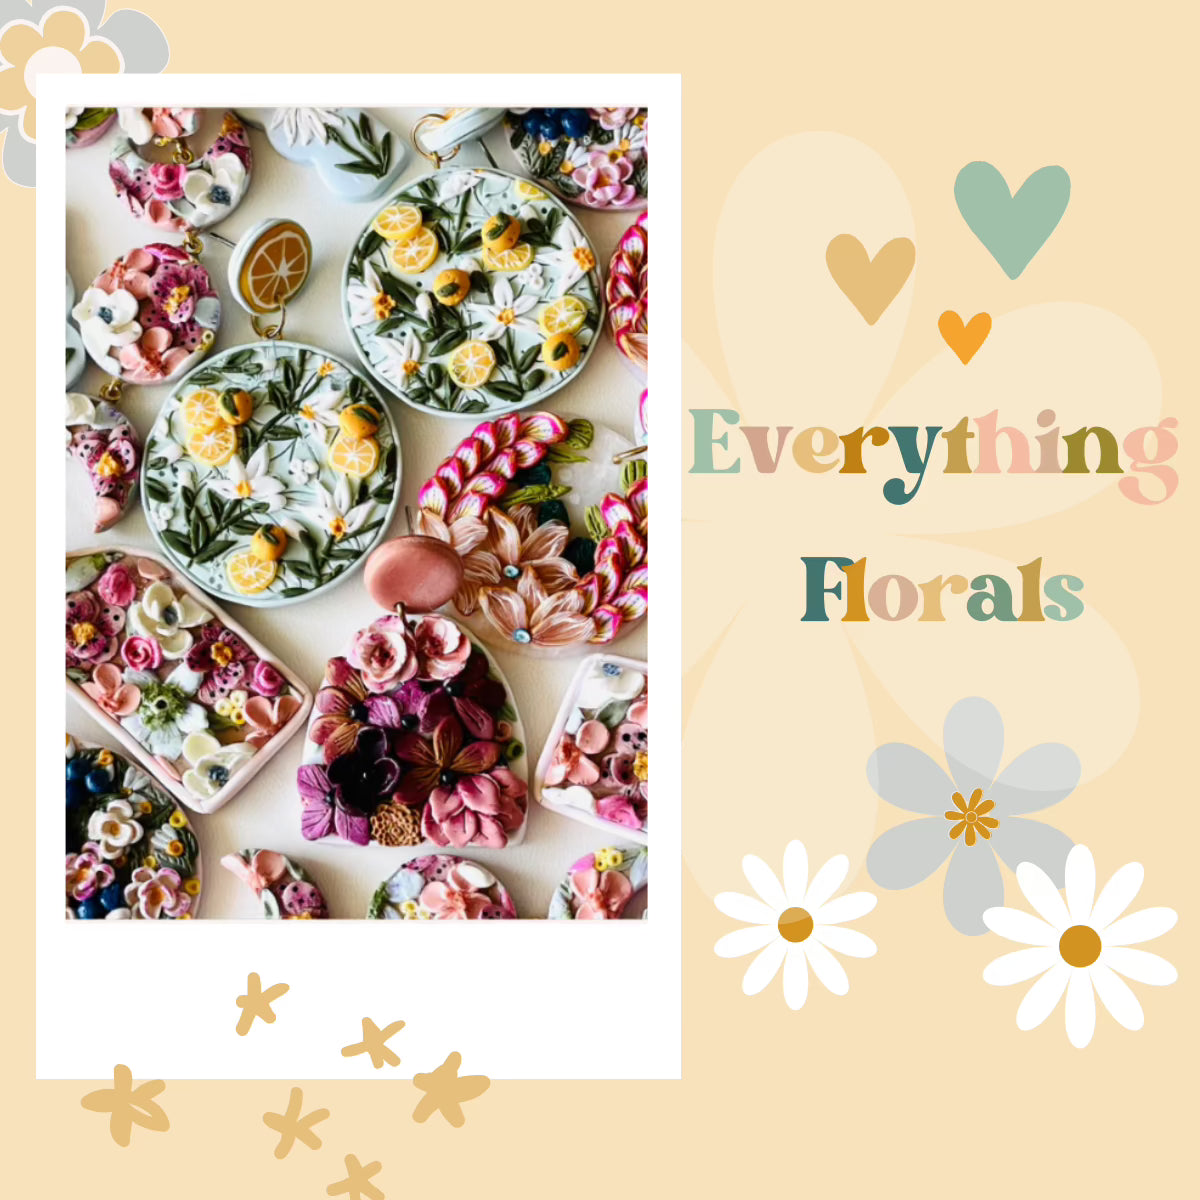 Everything Florals